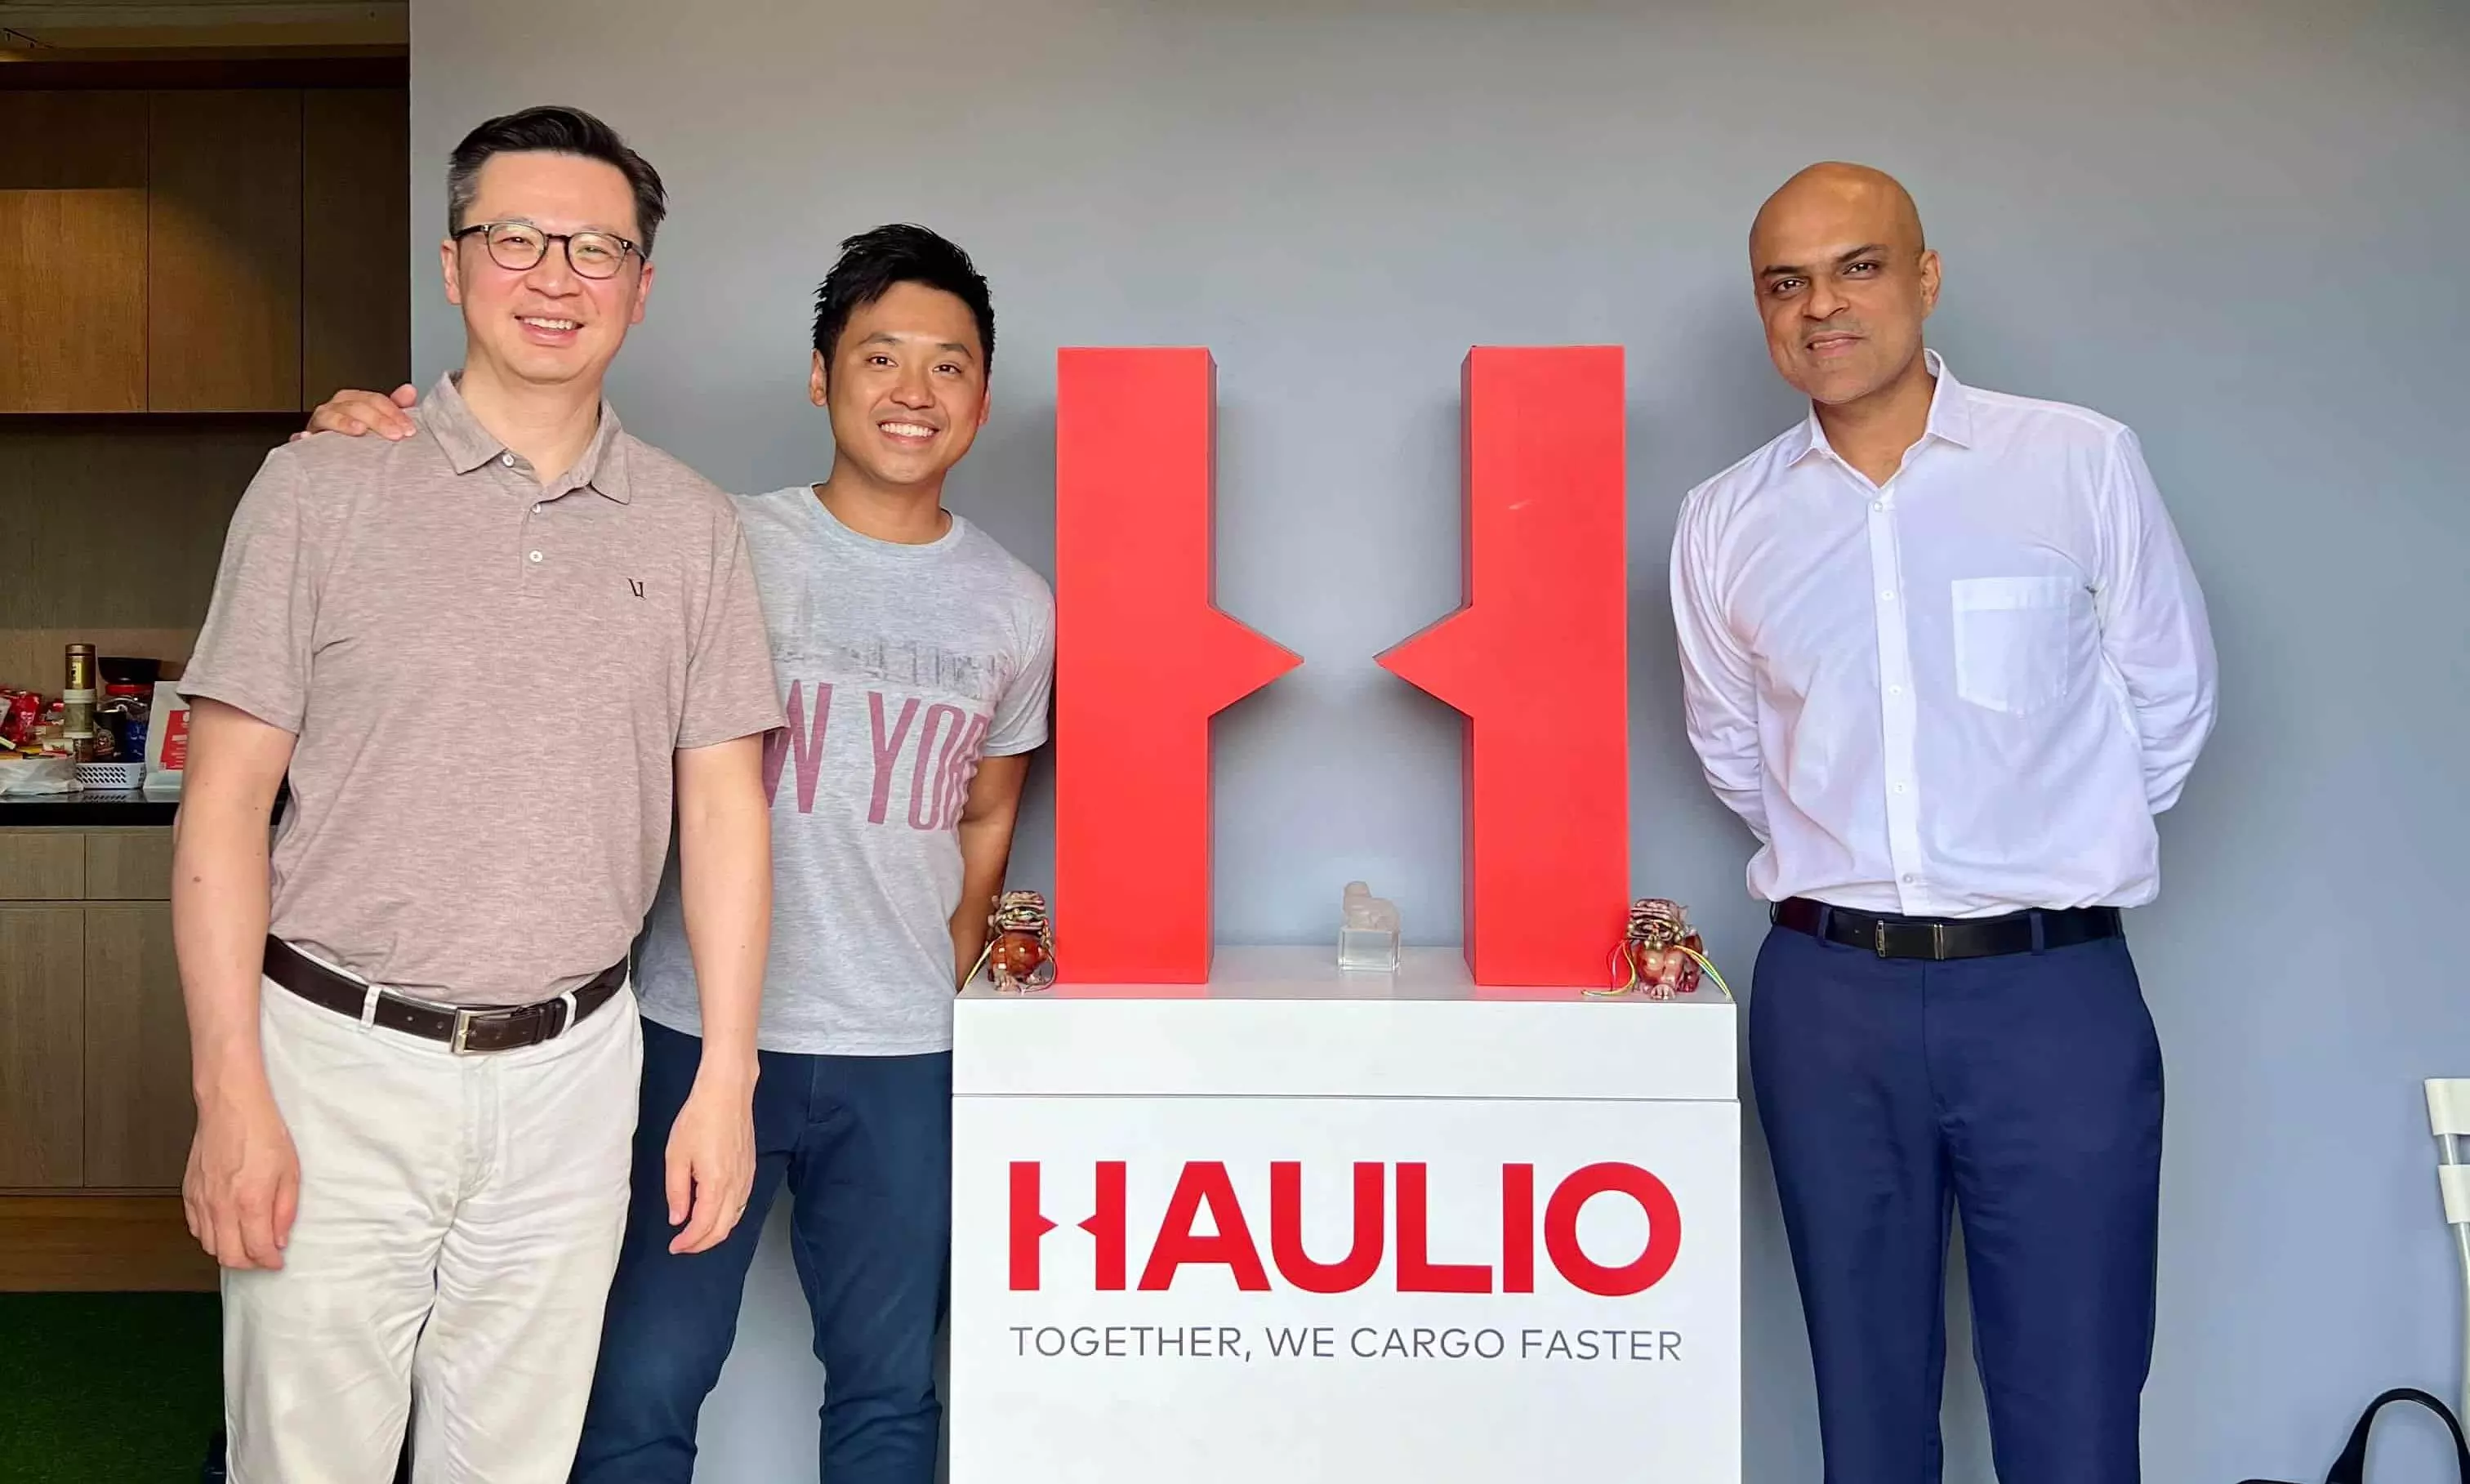 MatchLog expands to southeast Asia through alliance with Haulio